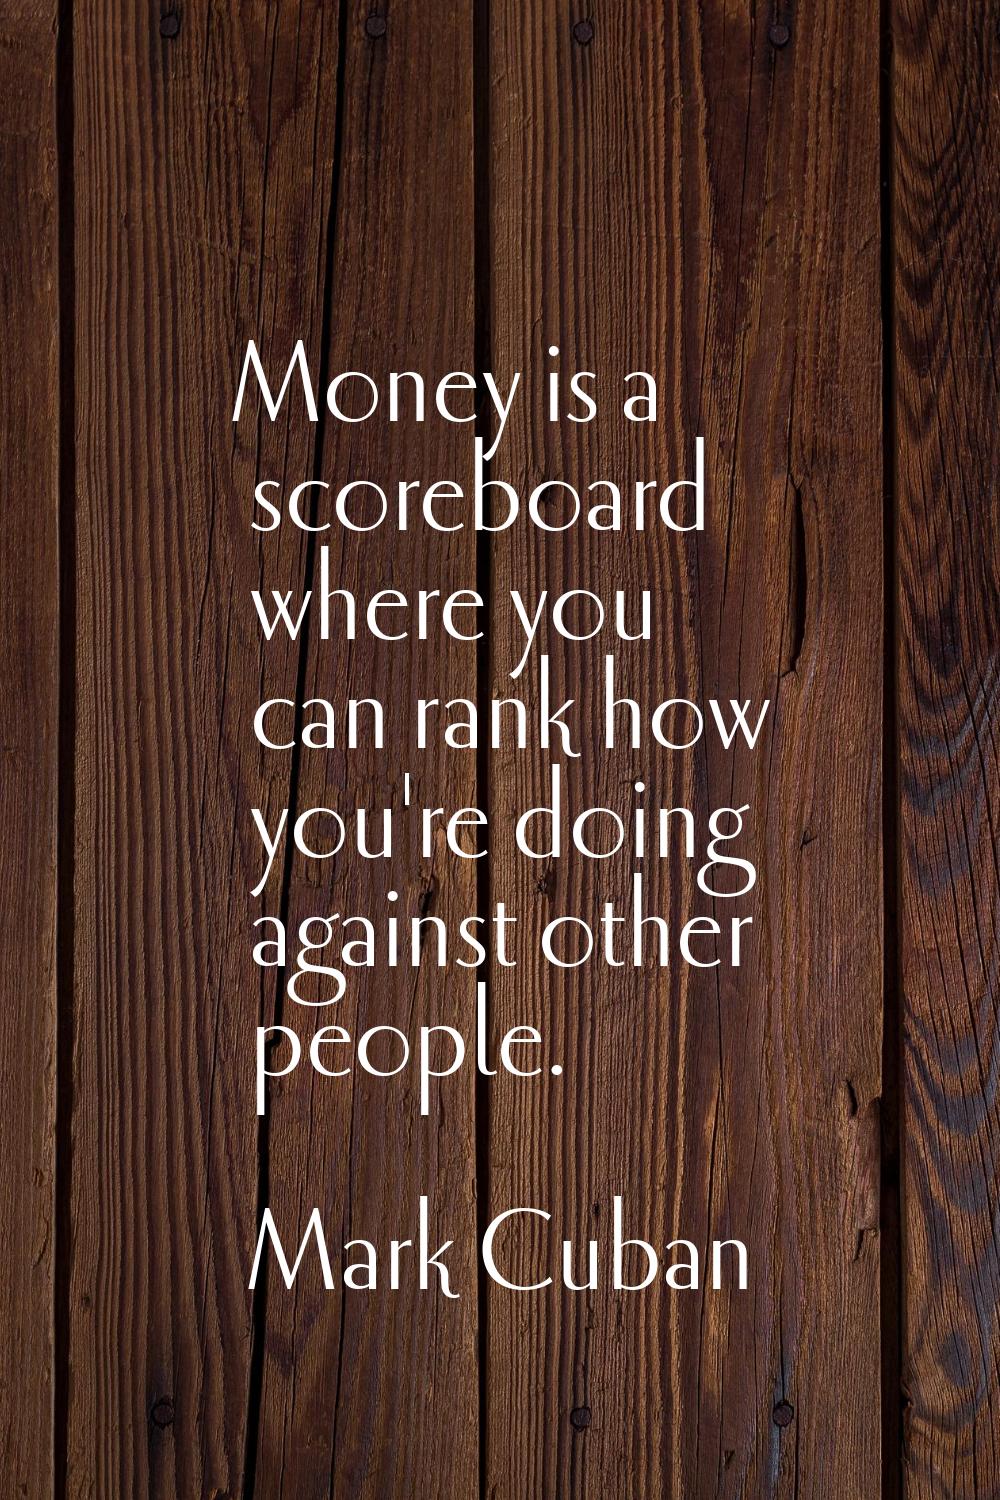 Money is a scoreboard where you can rank how you're doing against other people.